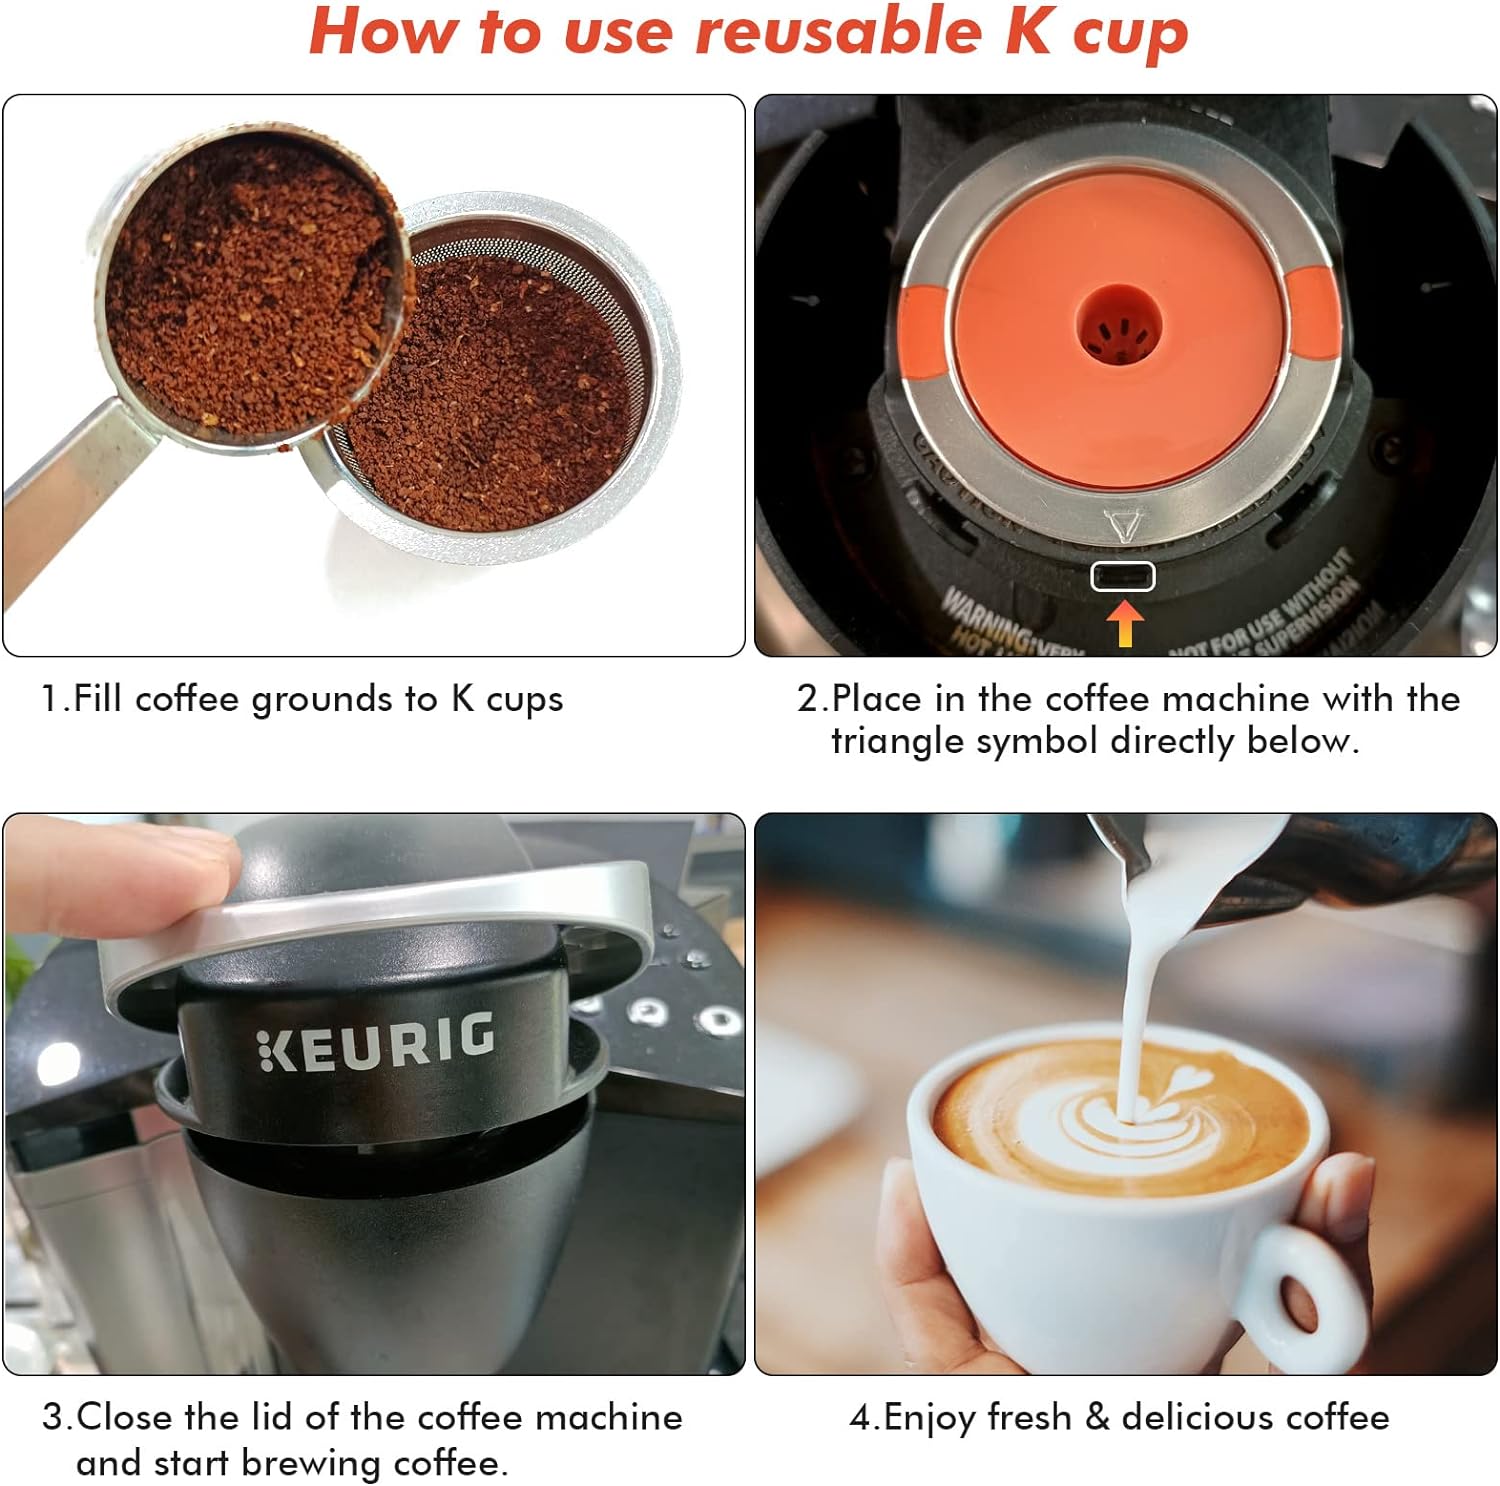 Generic Reusable K Cups For Keurig | keurig reusable coffee pods Compatible with 1.0 and 2.0 Keurig Single Cup Coffee Maker Stainless S